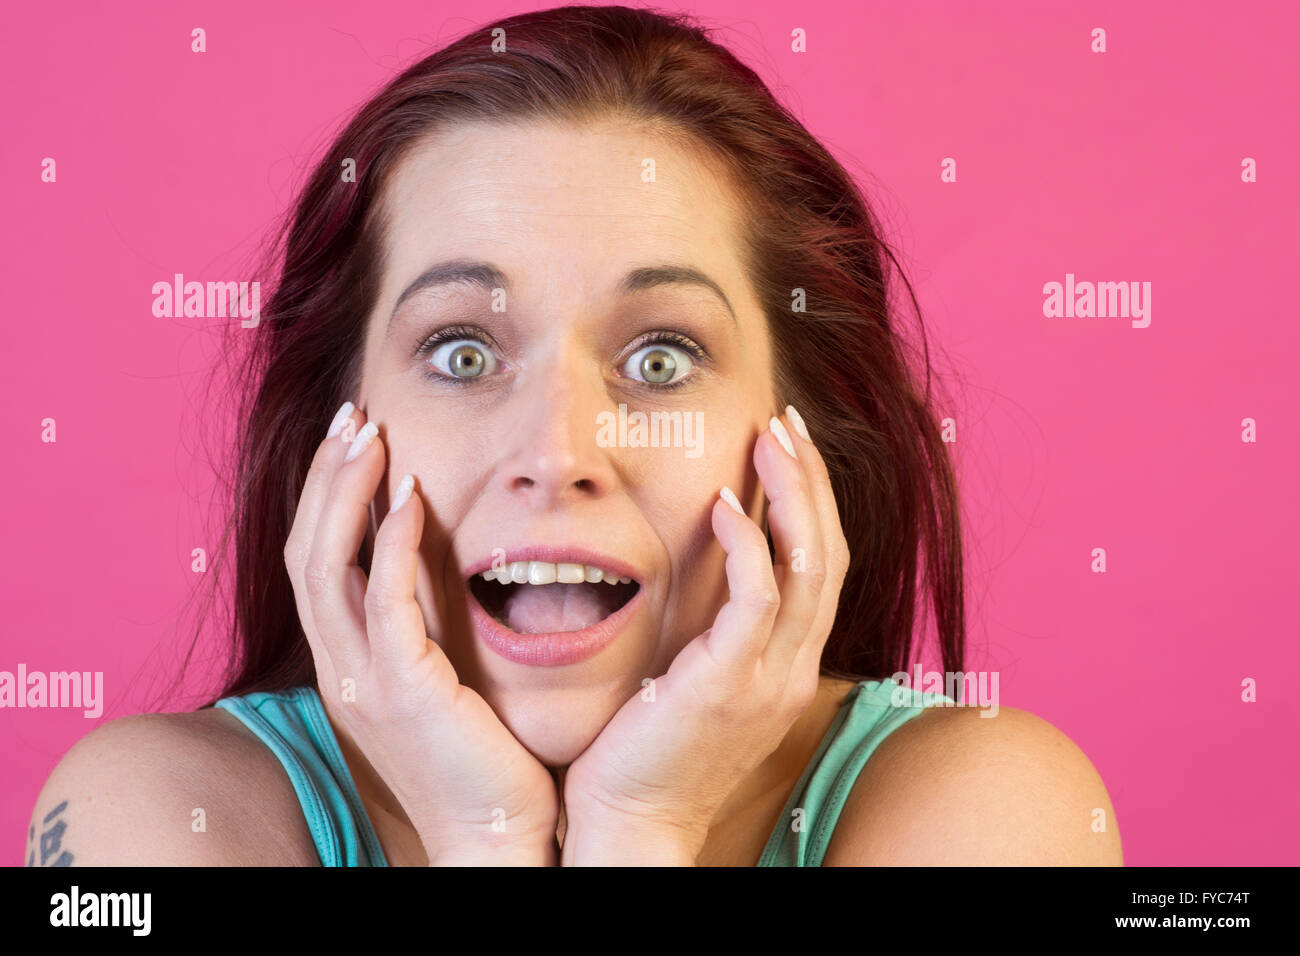 Surprised woman hands on face Stock Photo